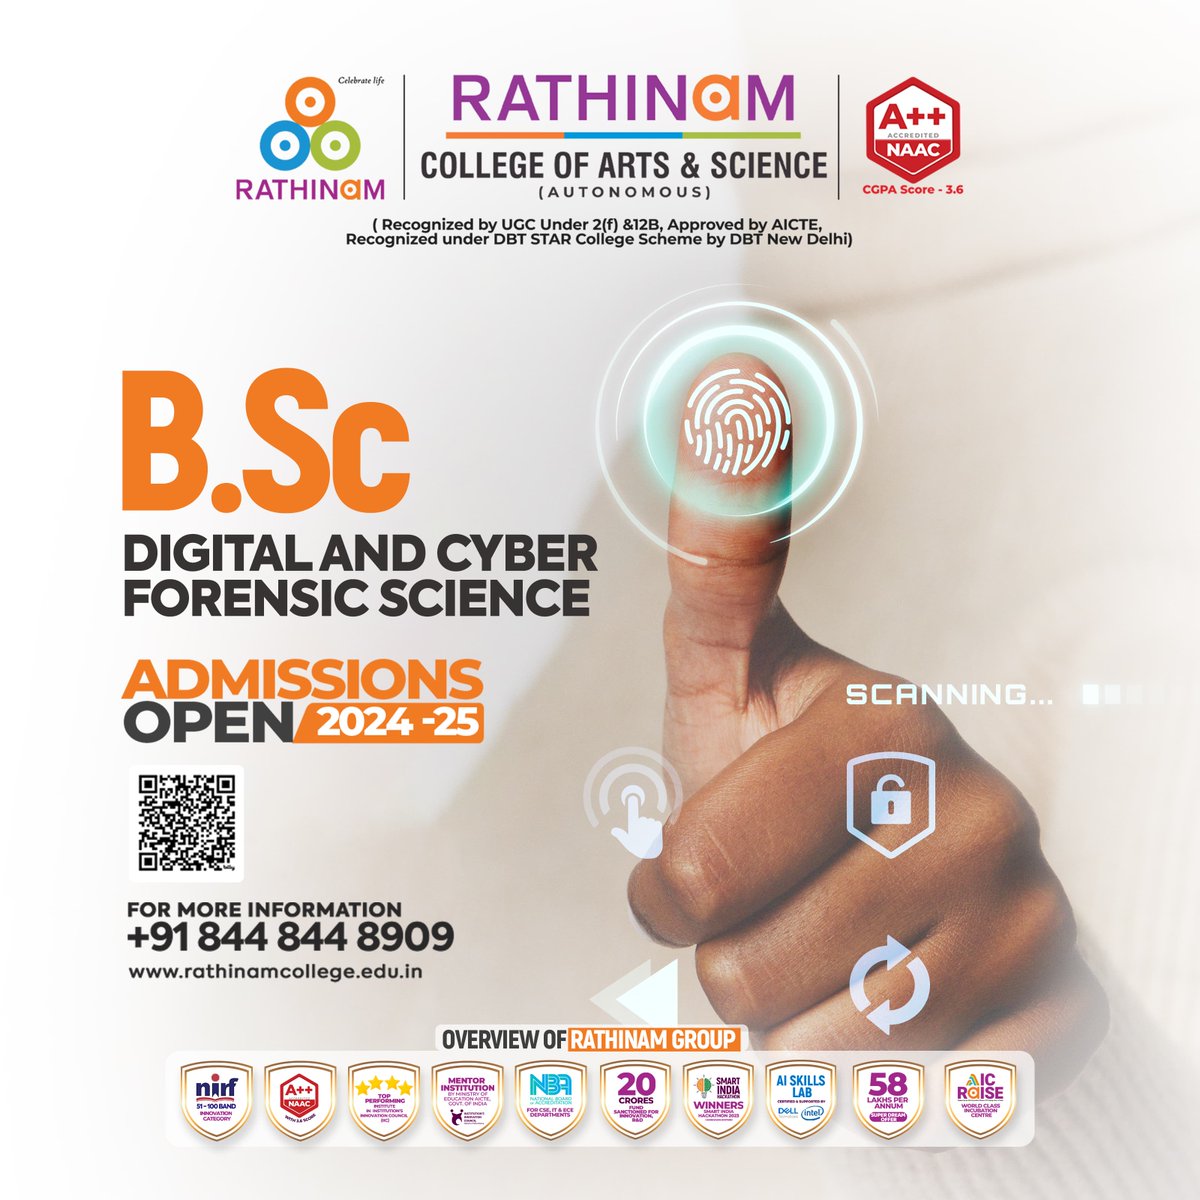 The Rathinam College of Arts and Science is now accepting applications for their B.Sc. Digital and Cyber Forensic Science program for the 2024-2025 academic year.
#DigitalForensics #CyberSecurity #BSc #TechCareers #FutureProofYourCareer #CybersecurityAwareness